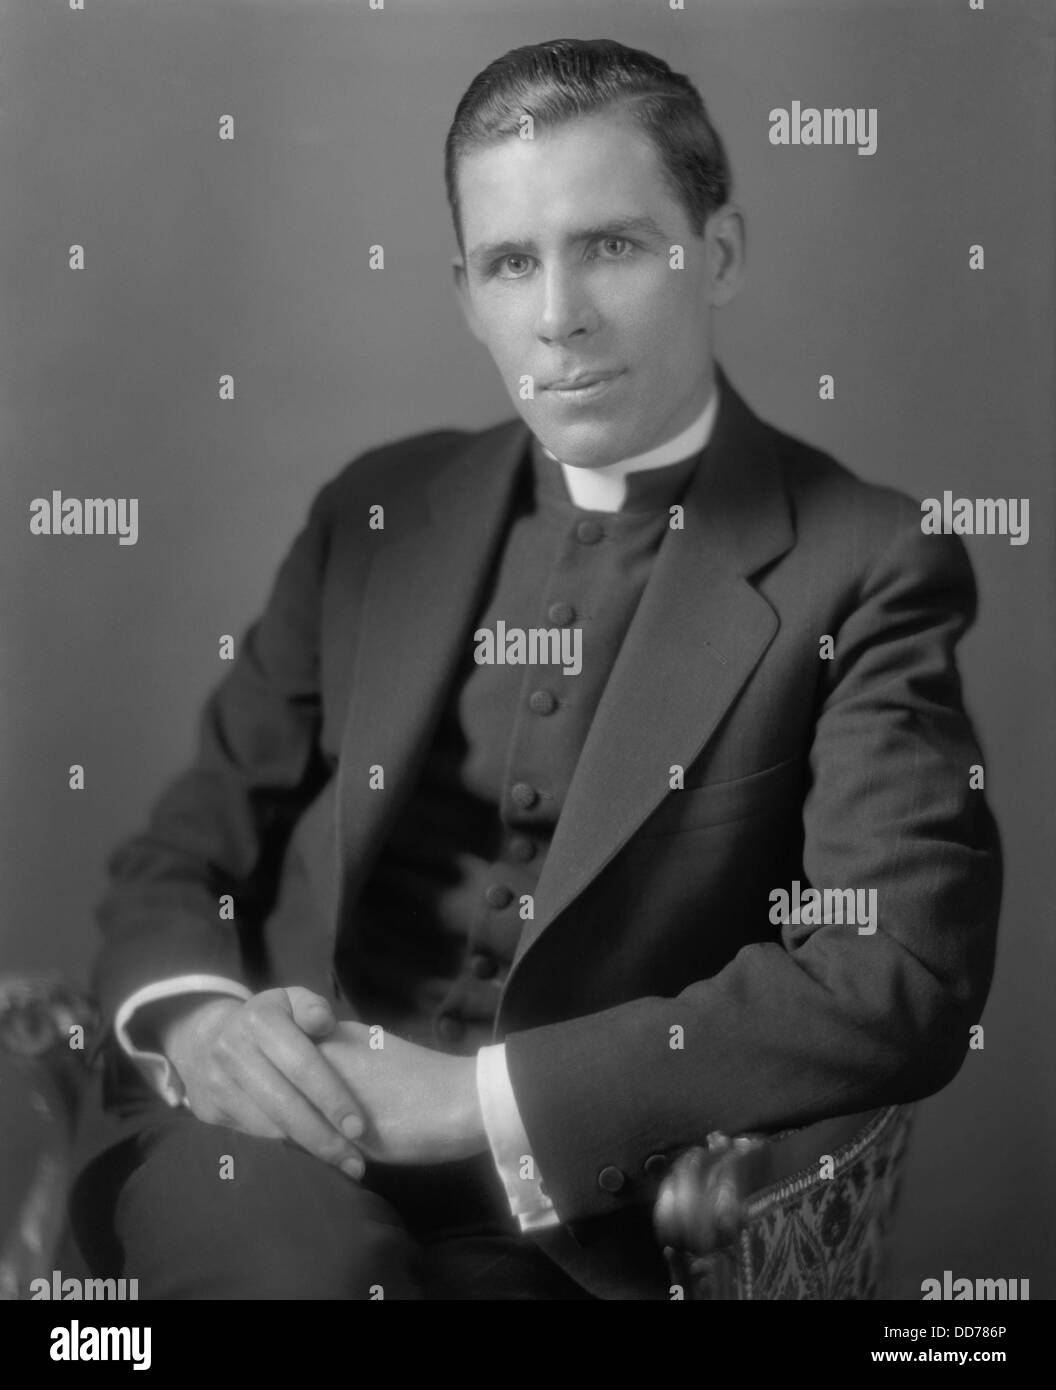 Fulton John Sheen, was a prominent Catholic priest by the age of 35. He hosted the radio program 'The Catholic Hour' from Stock Photo